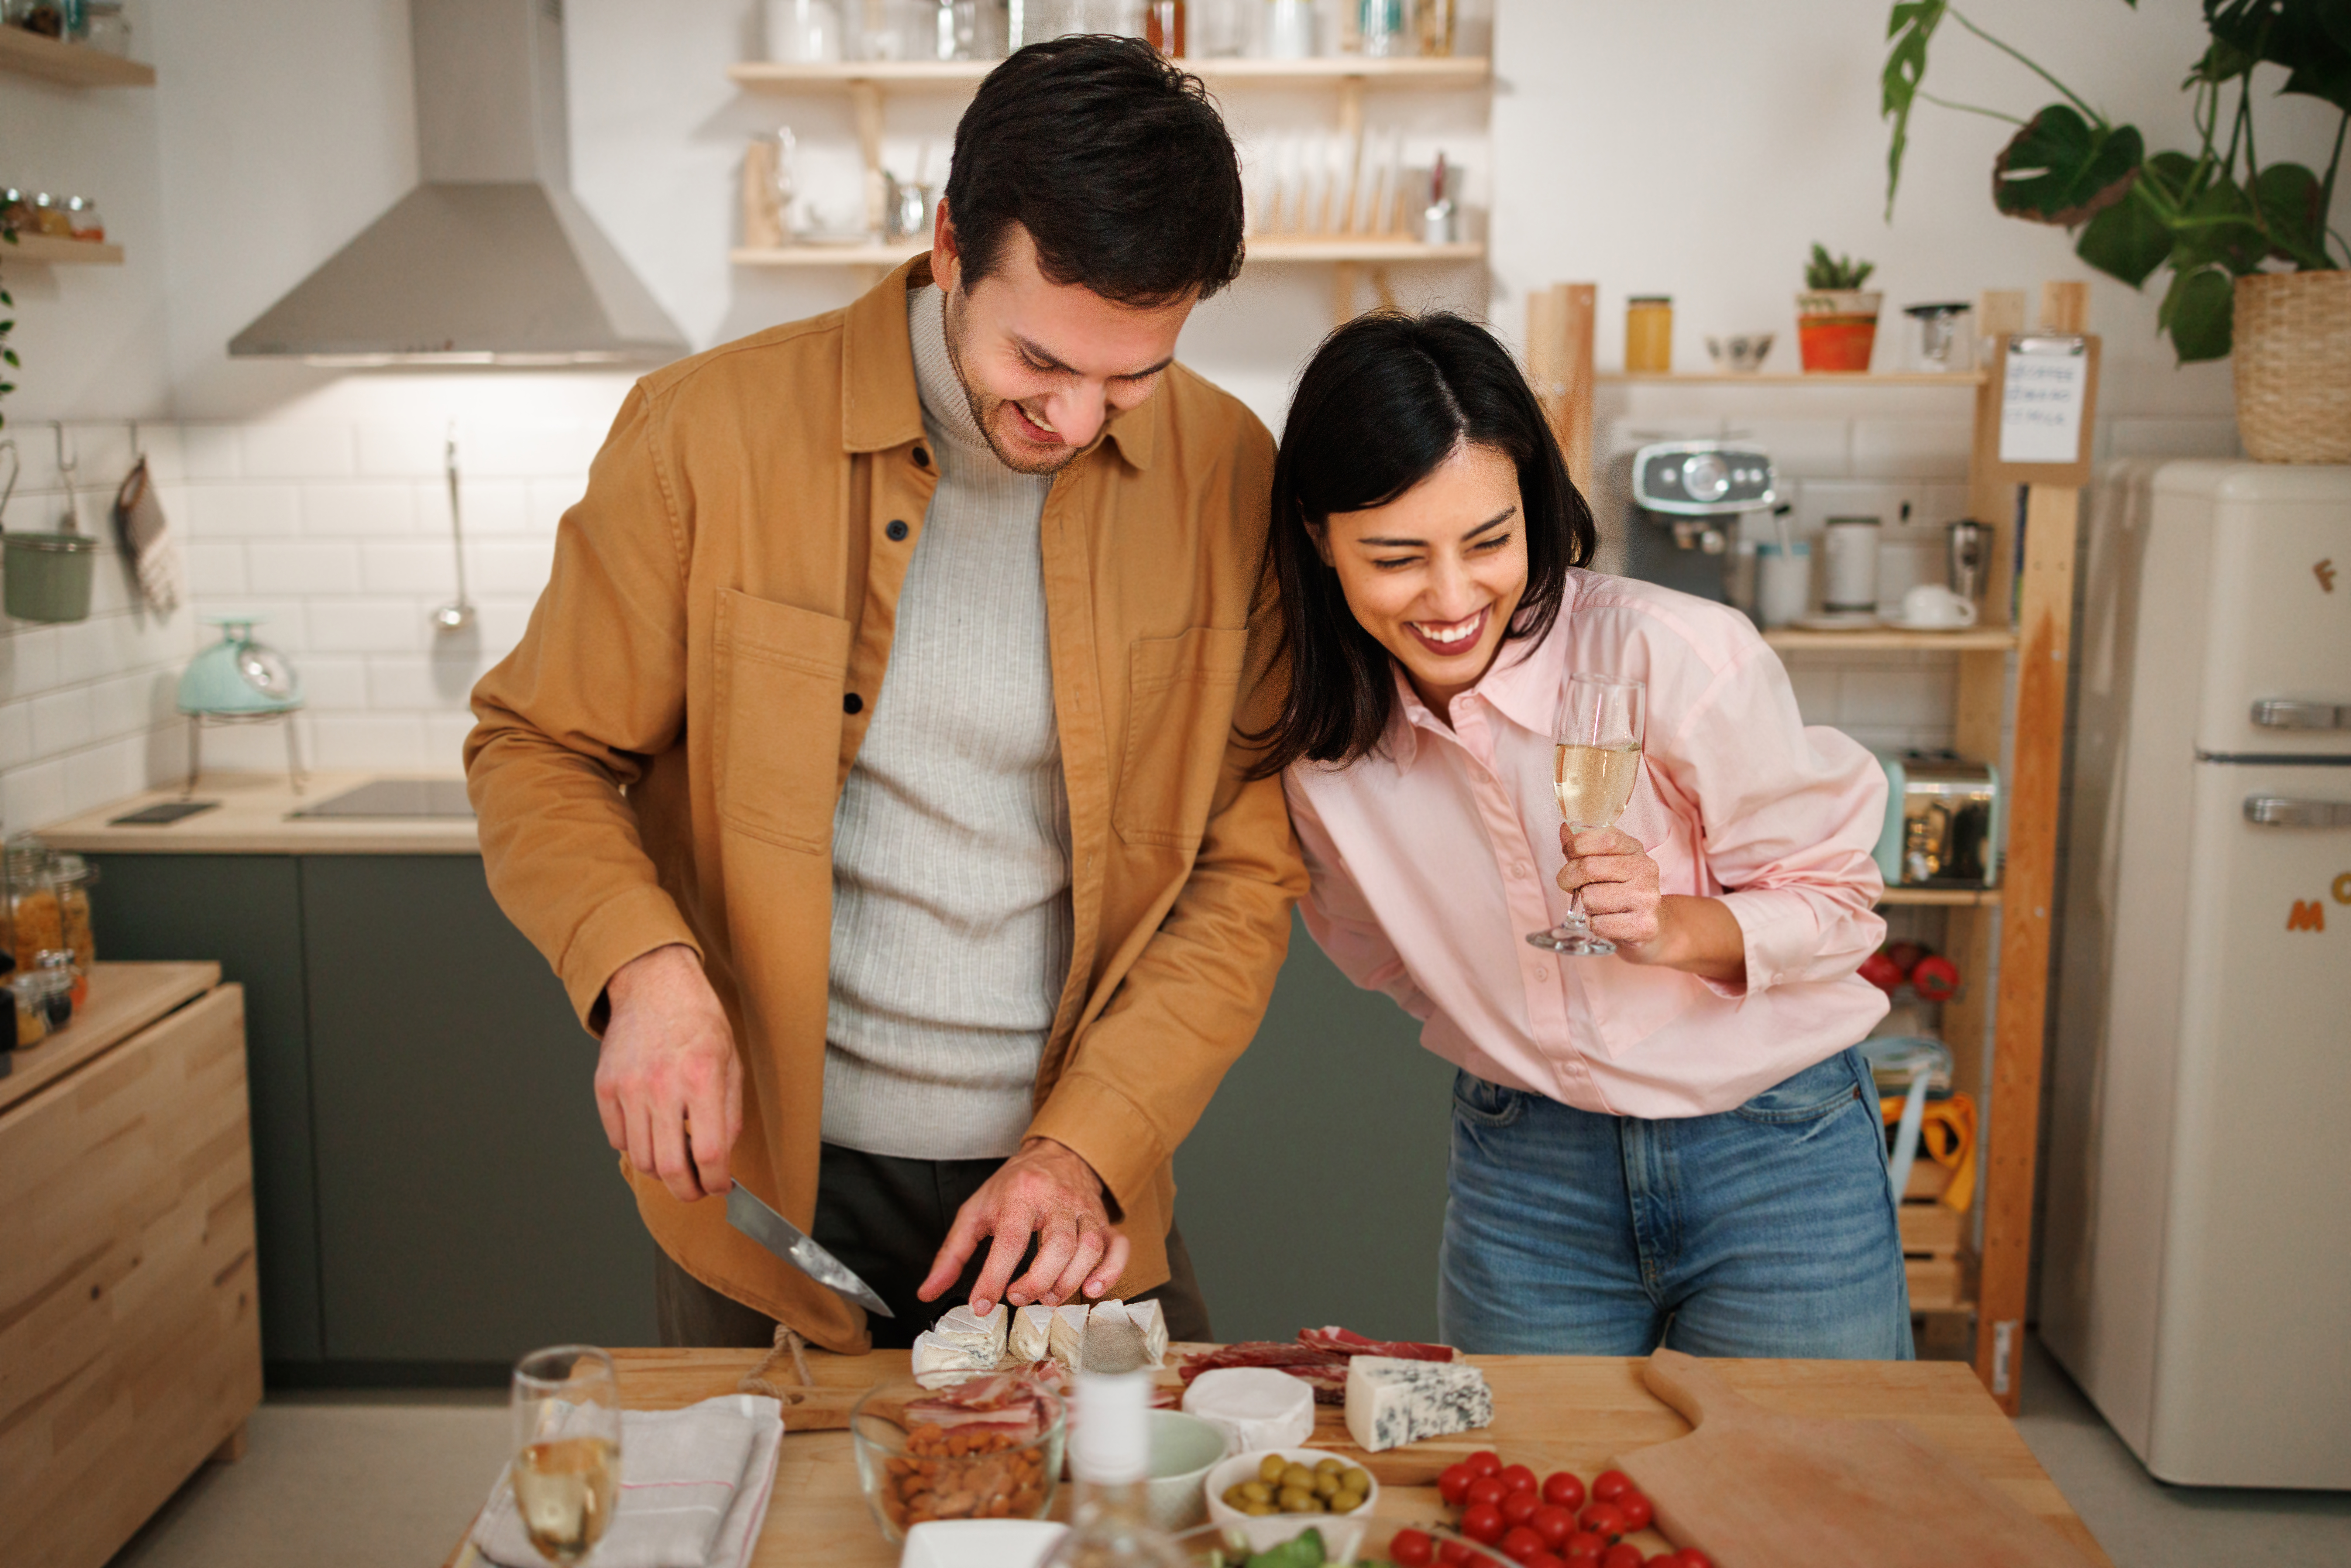 A happy couple cooking together | Source: Getty Images